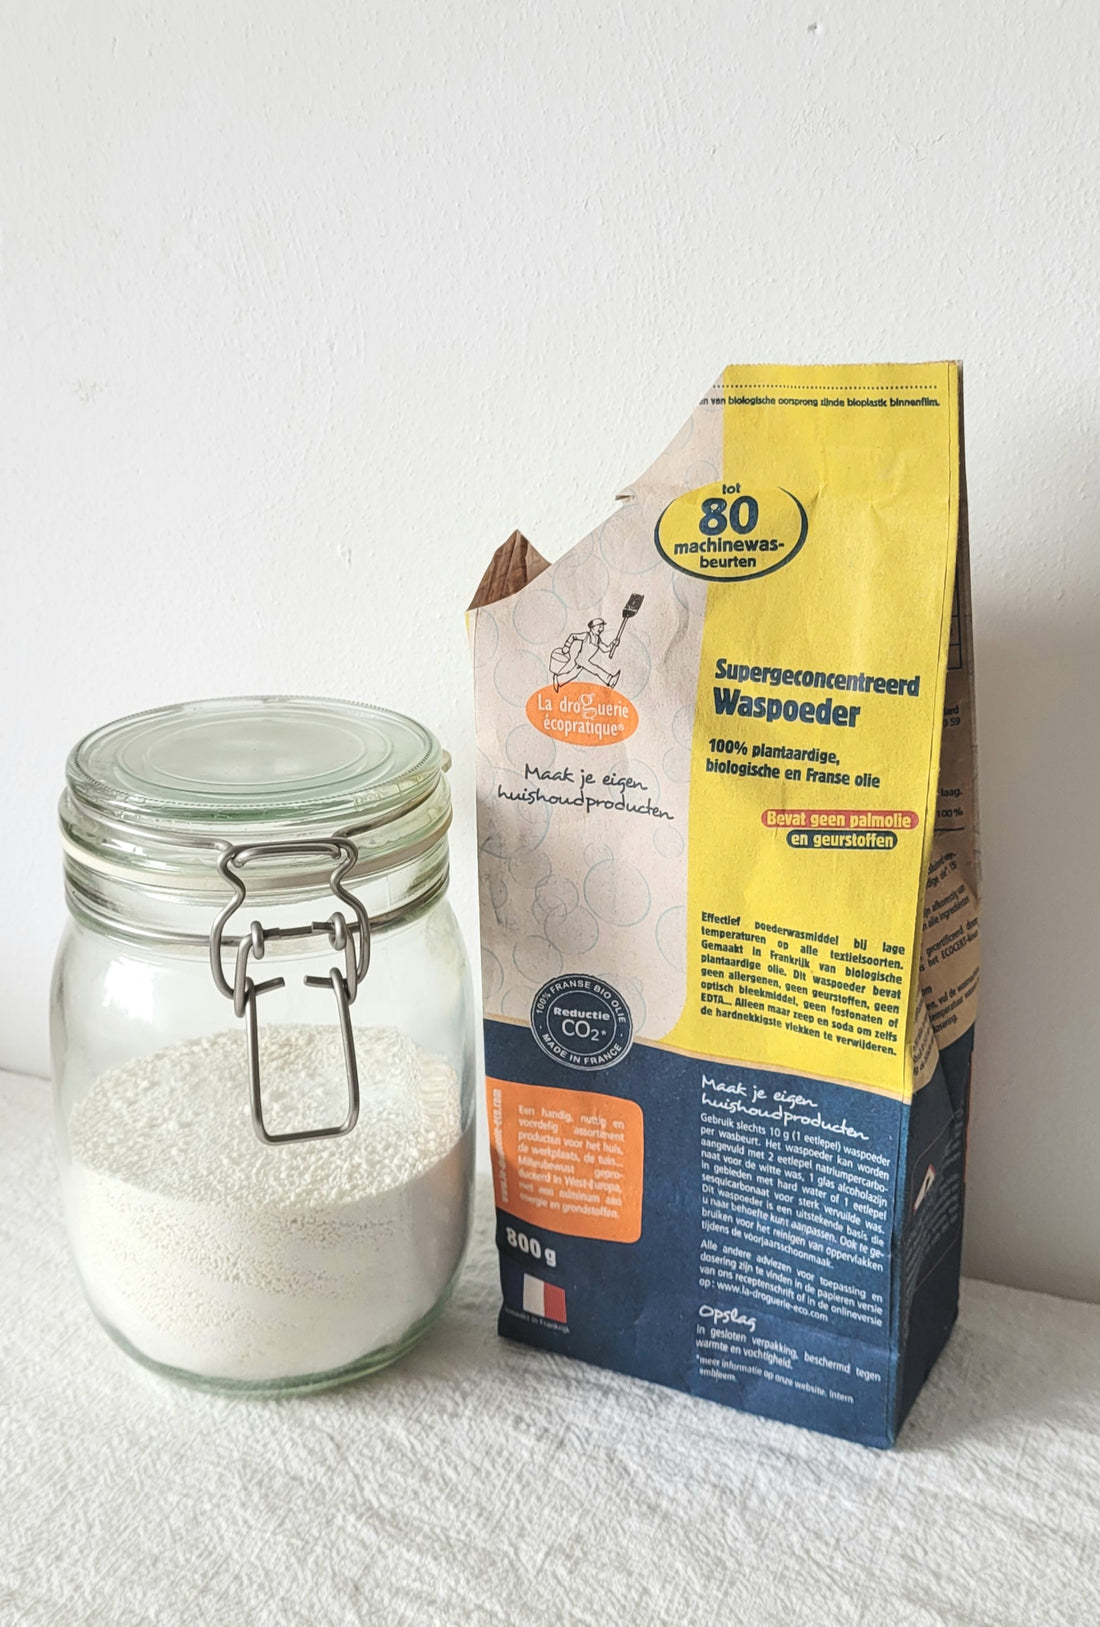 Super concentrated eco washing powder